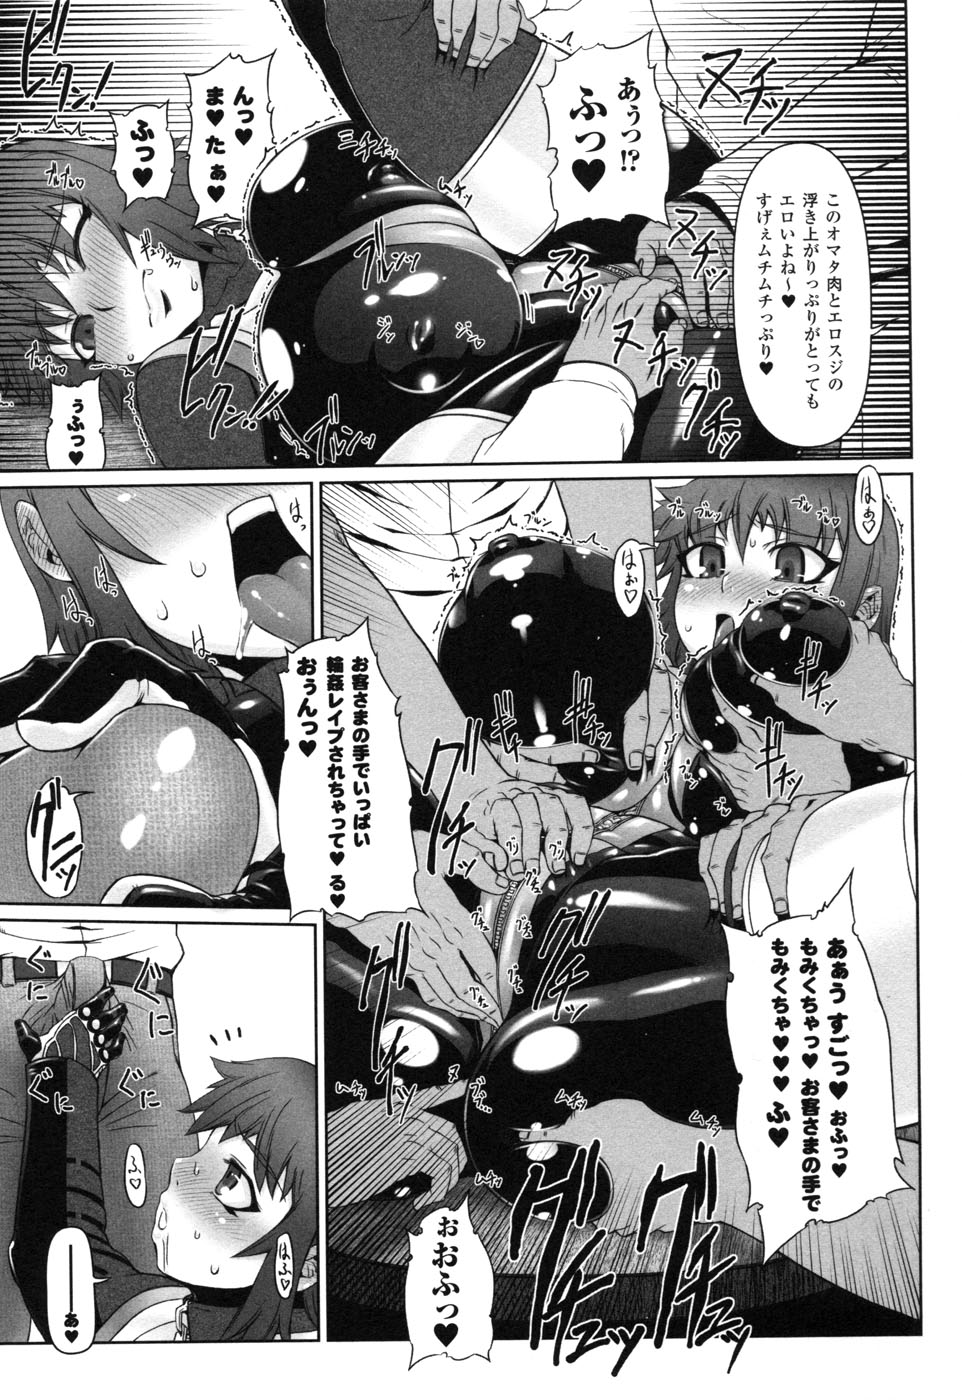 Rider Suit Heroine Anthology Comics 2 page 33 full